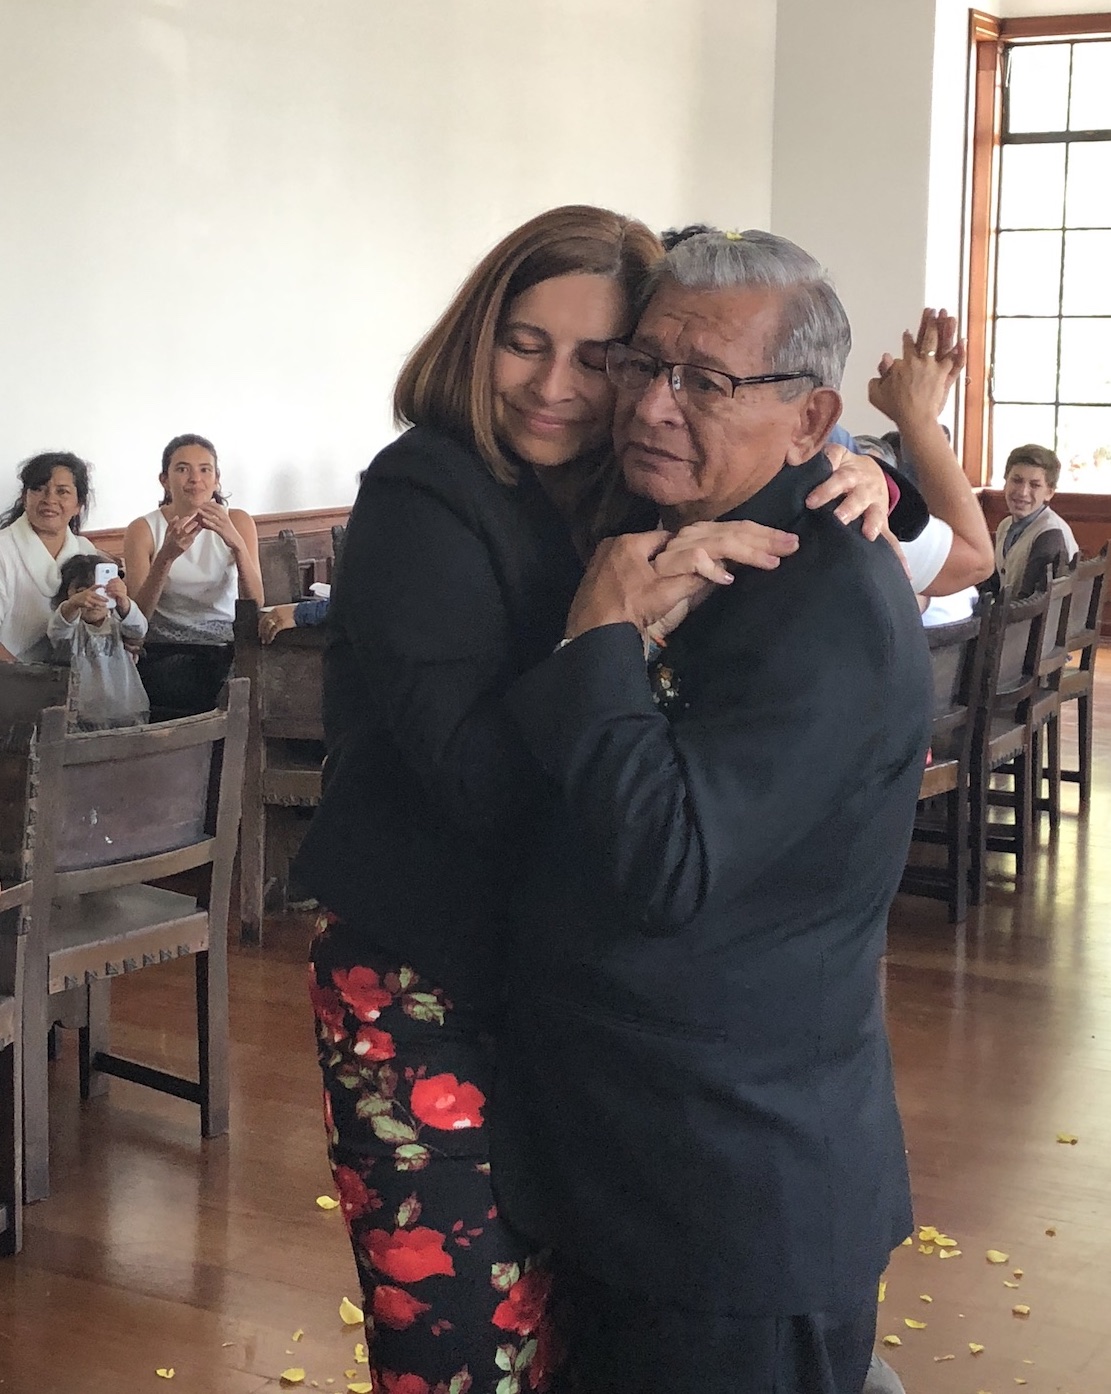 The author dances with her father on his wedding day, February 2, 2018, in Zipaquira, Colombia. [Photo] Ana Beatriz Cholo collection